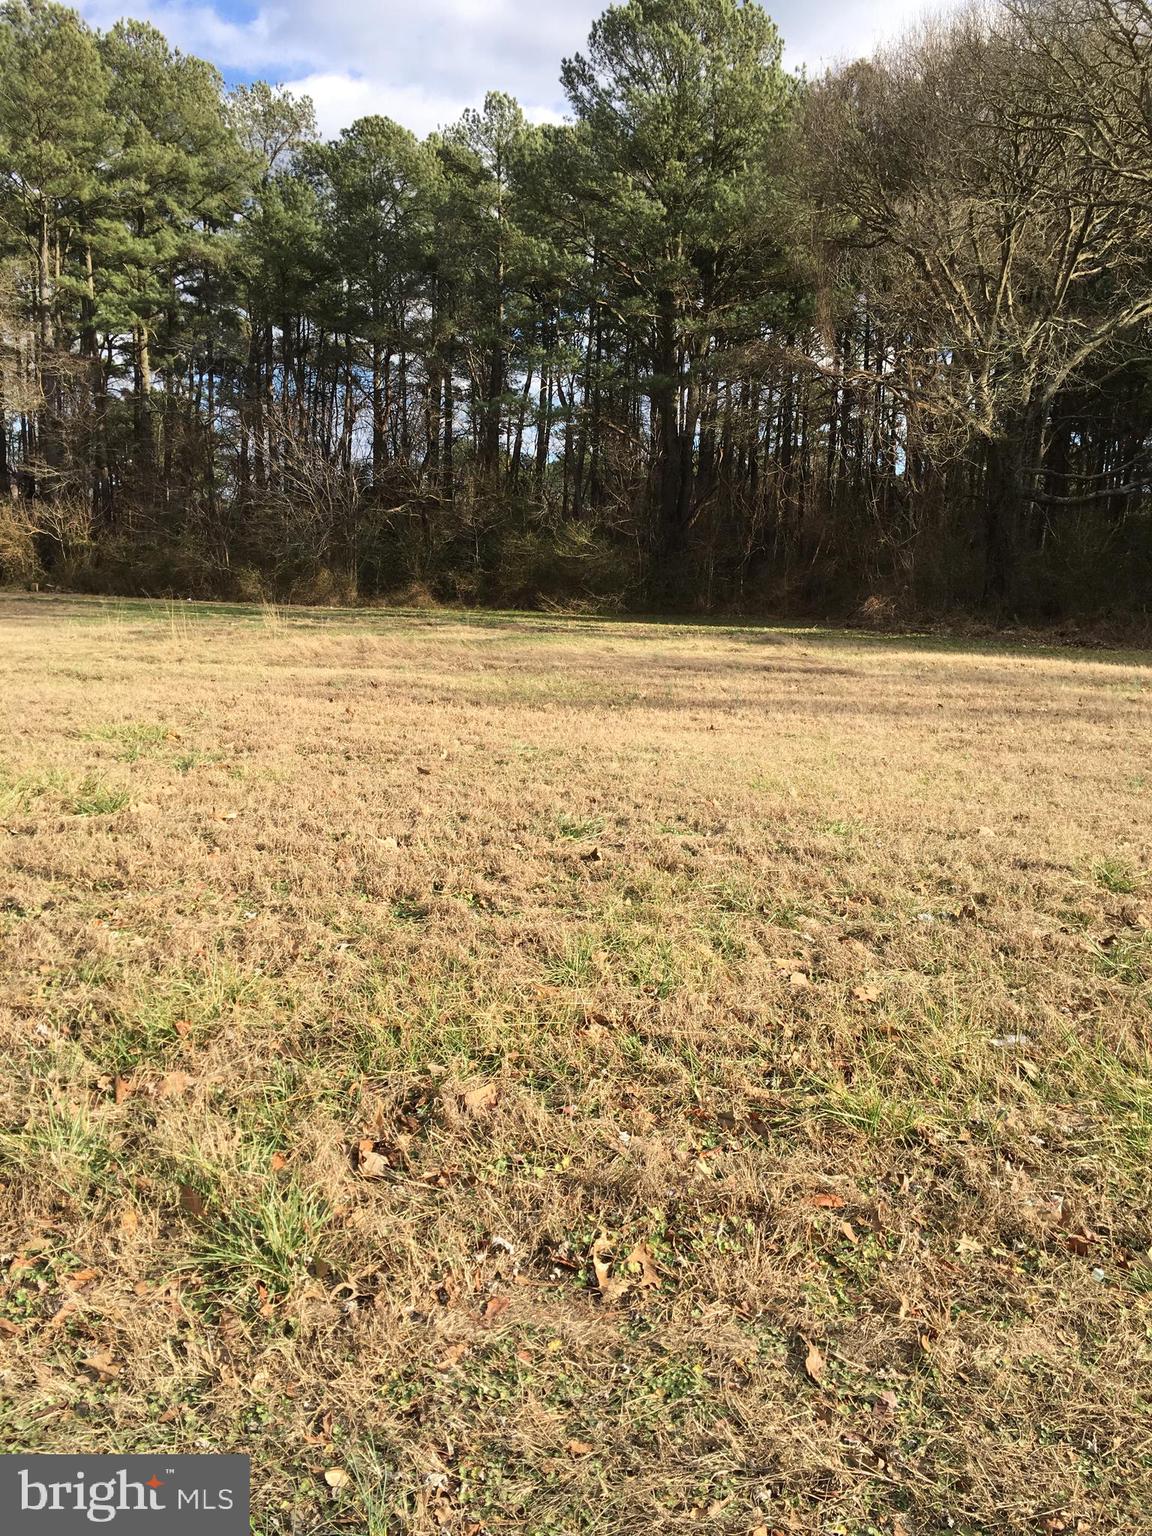 Commercial lot Sales price include   3 lots 2113, 2115, 2117  Northwood  Dr. each lot is 50x200

For sales price $ 199,000. include the house 2111 Northwood Dr. right next to the lots